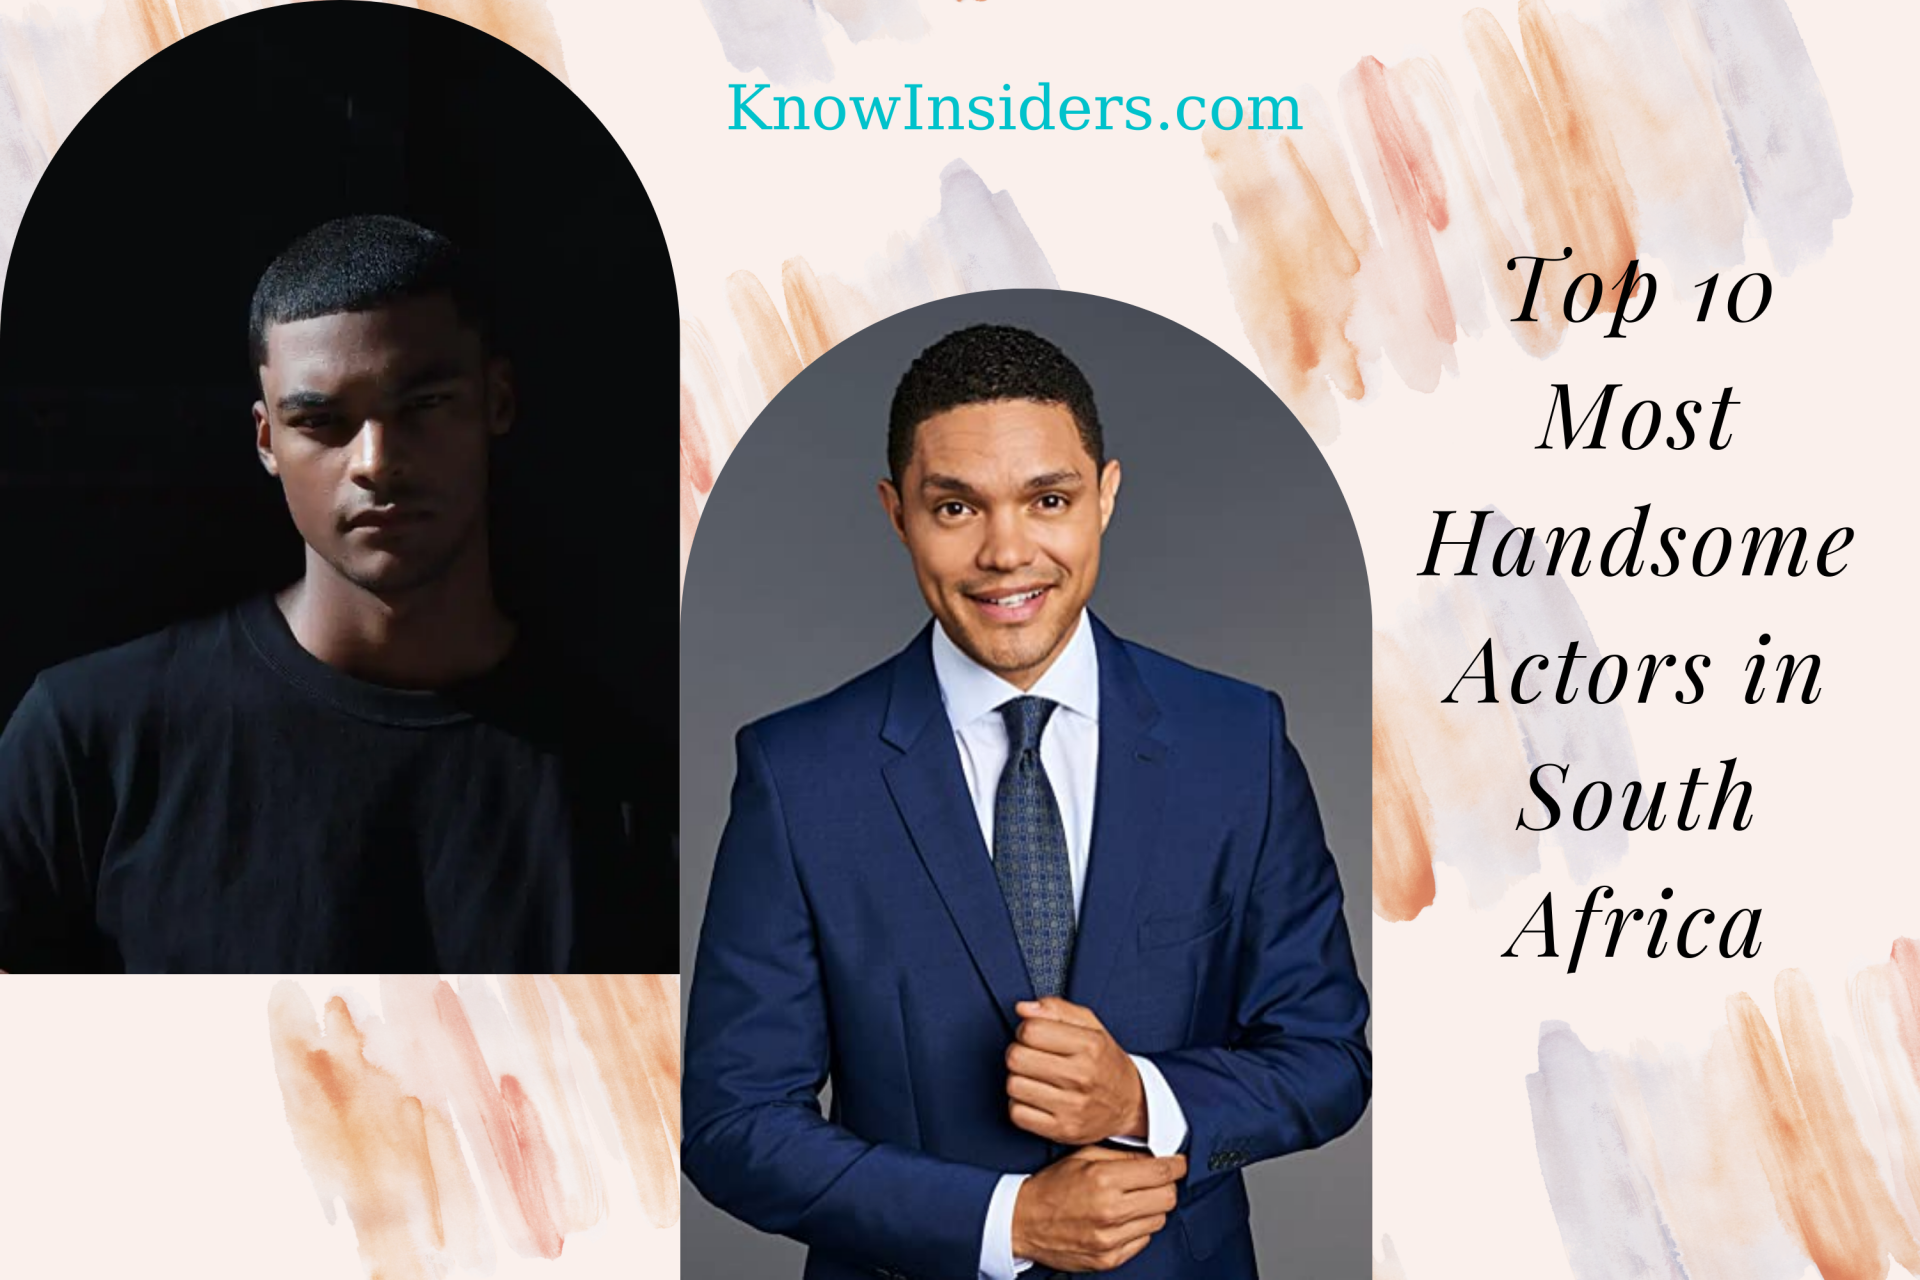 top 10 most handsome actors in south africa